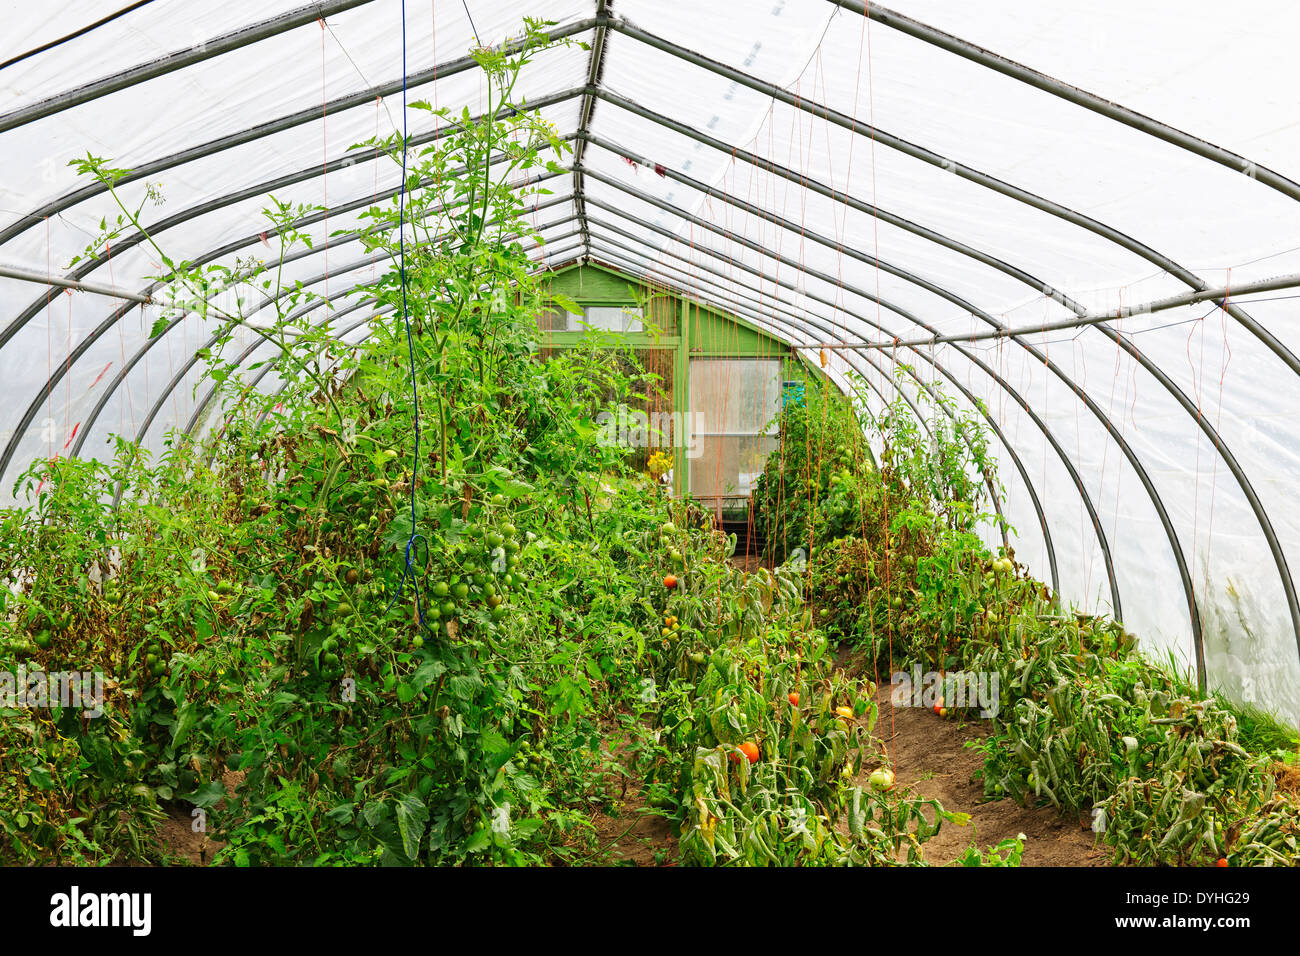 Small plastic covered greenhouse or hothouse interior with tomato plants Stock Photo